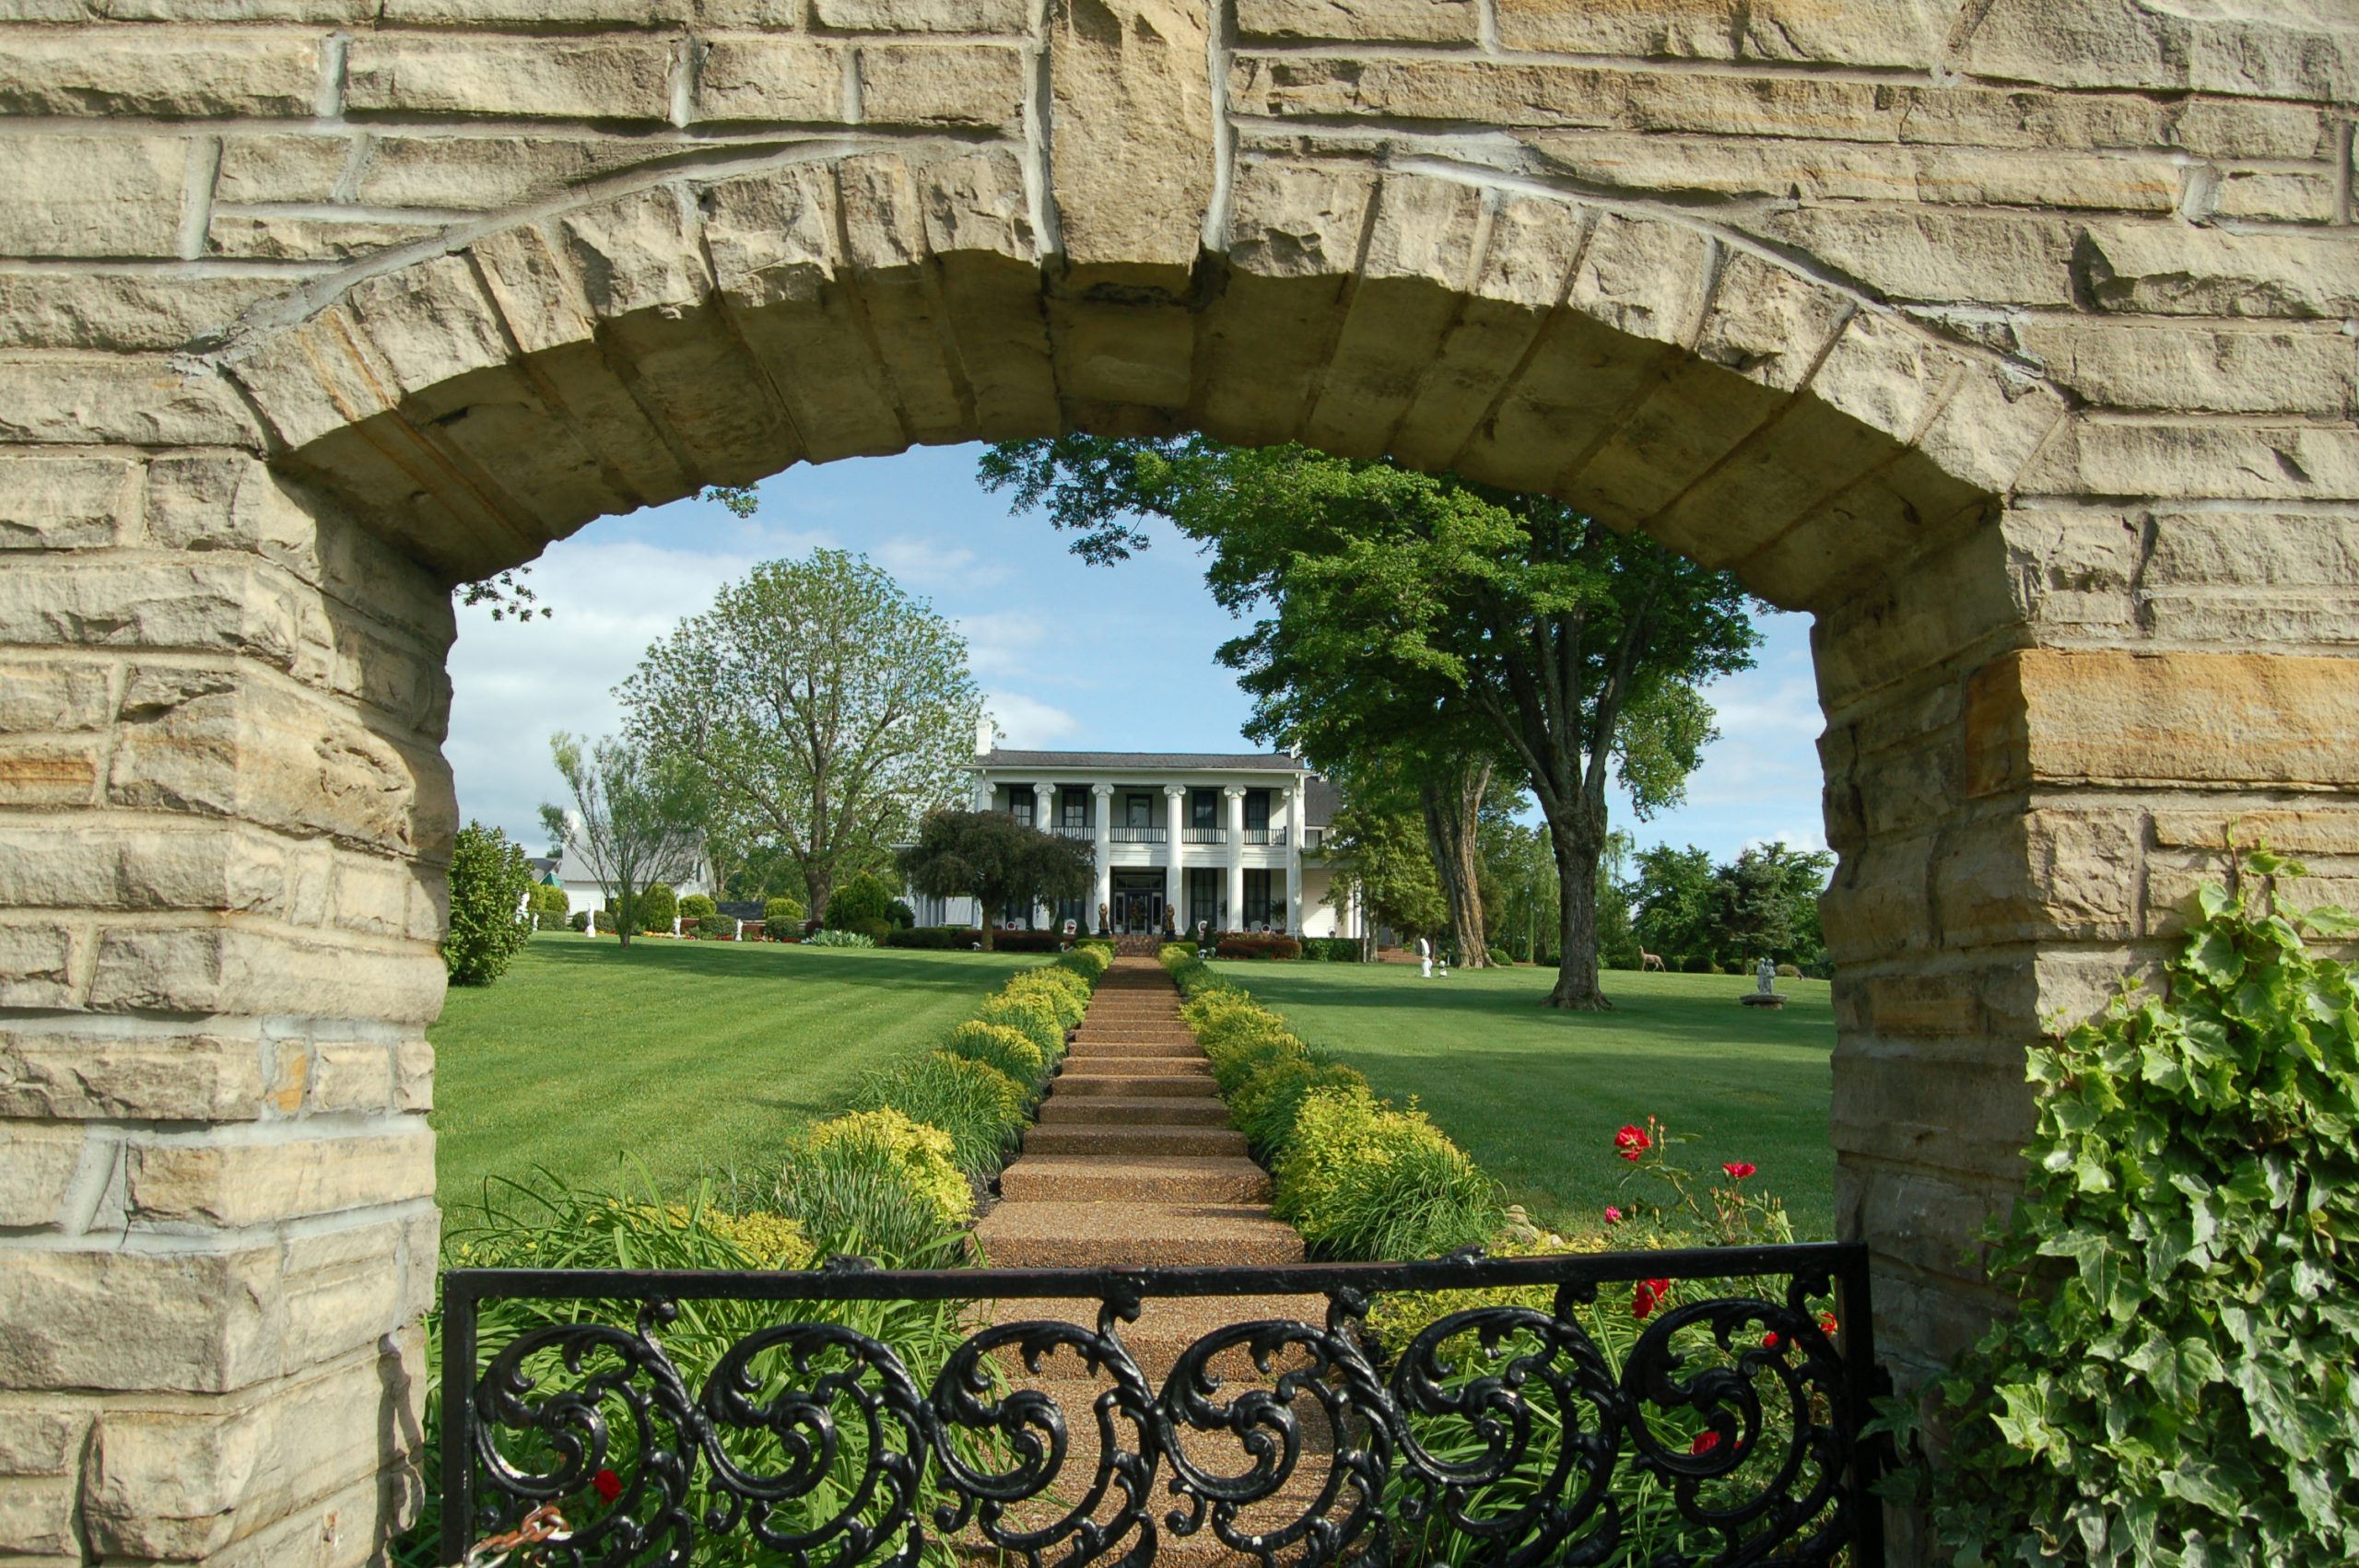 Loretta Lynn’s Ranch, main house – lush green lawns and a stepped walkway lead up to the big two-storey white house embellished with pillars – as viewed from a distance through a brick archway.